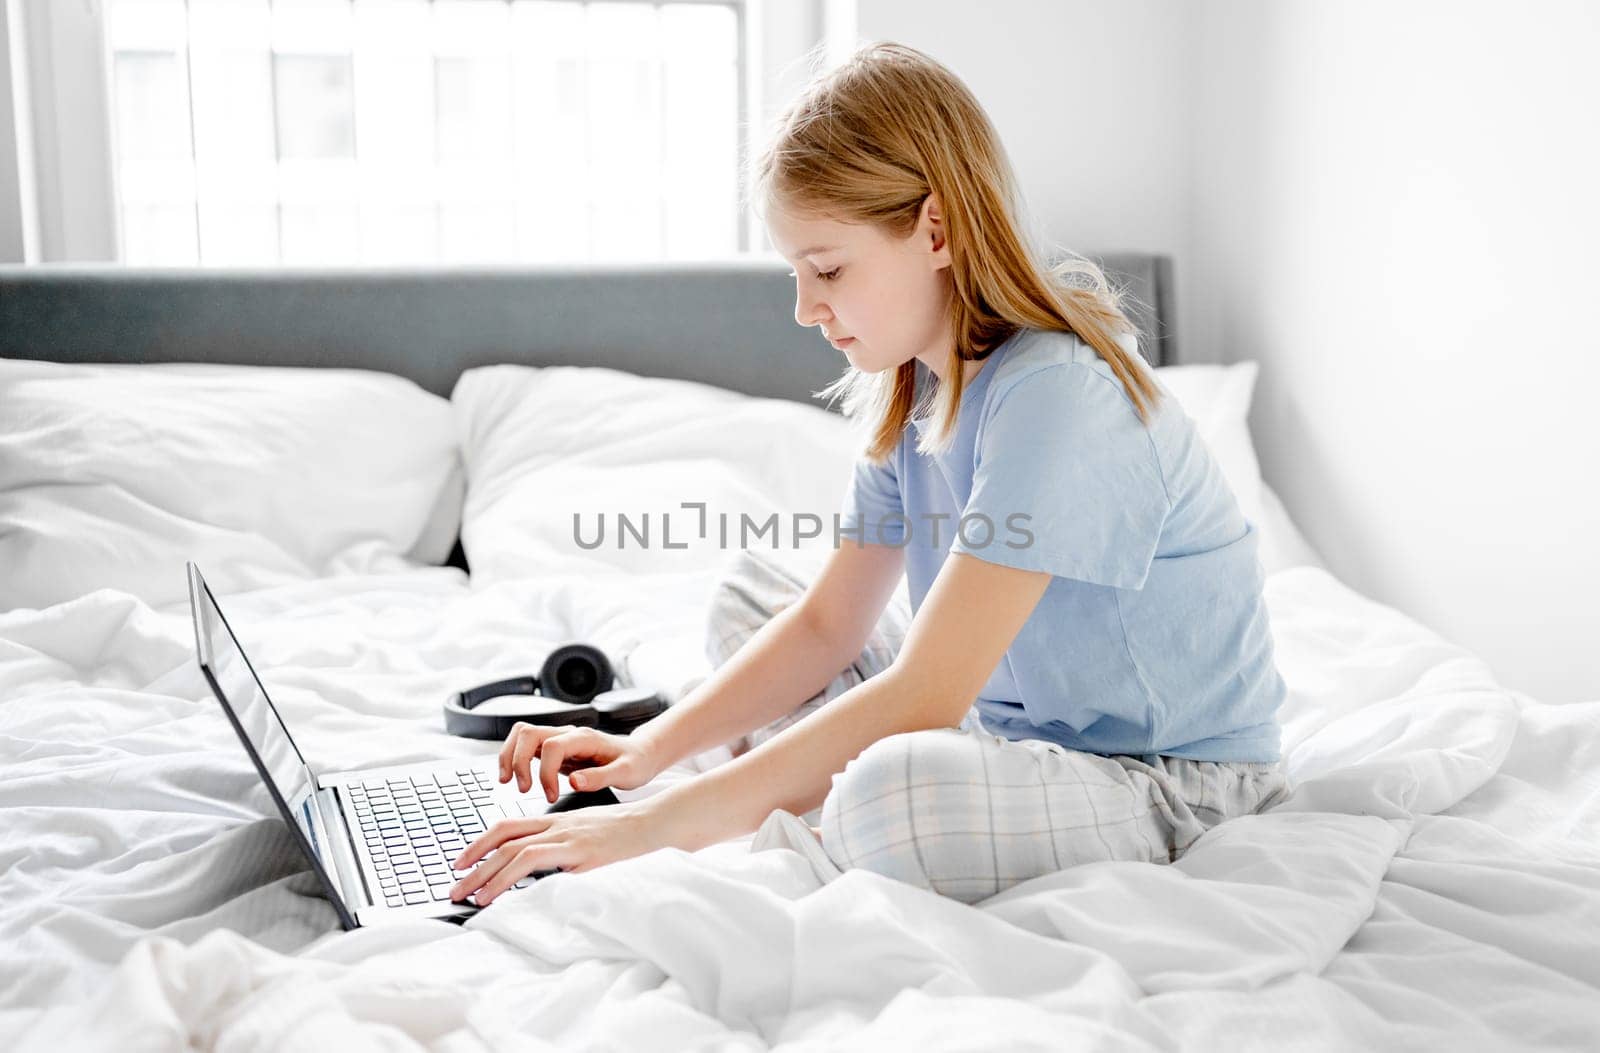 Girl Sits In Bed With Laptop In Bright Room In The Morning